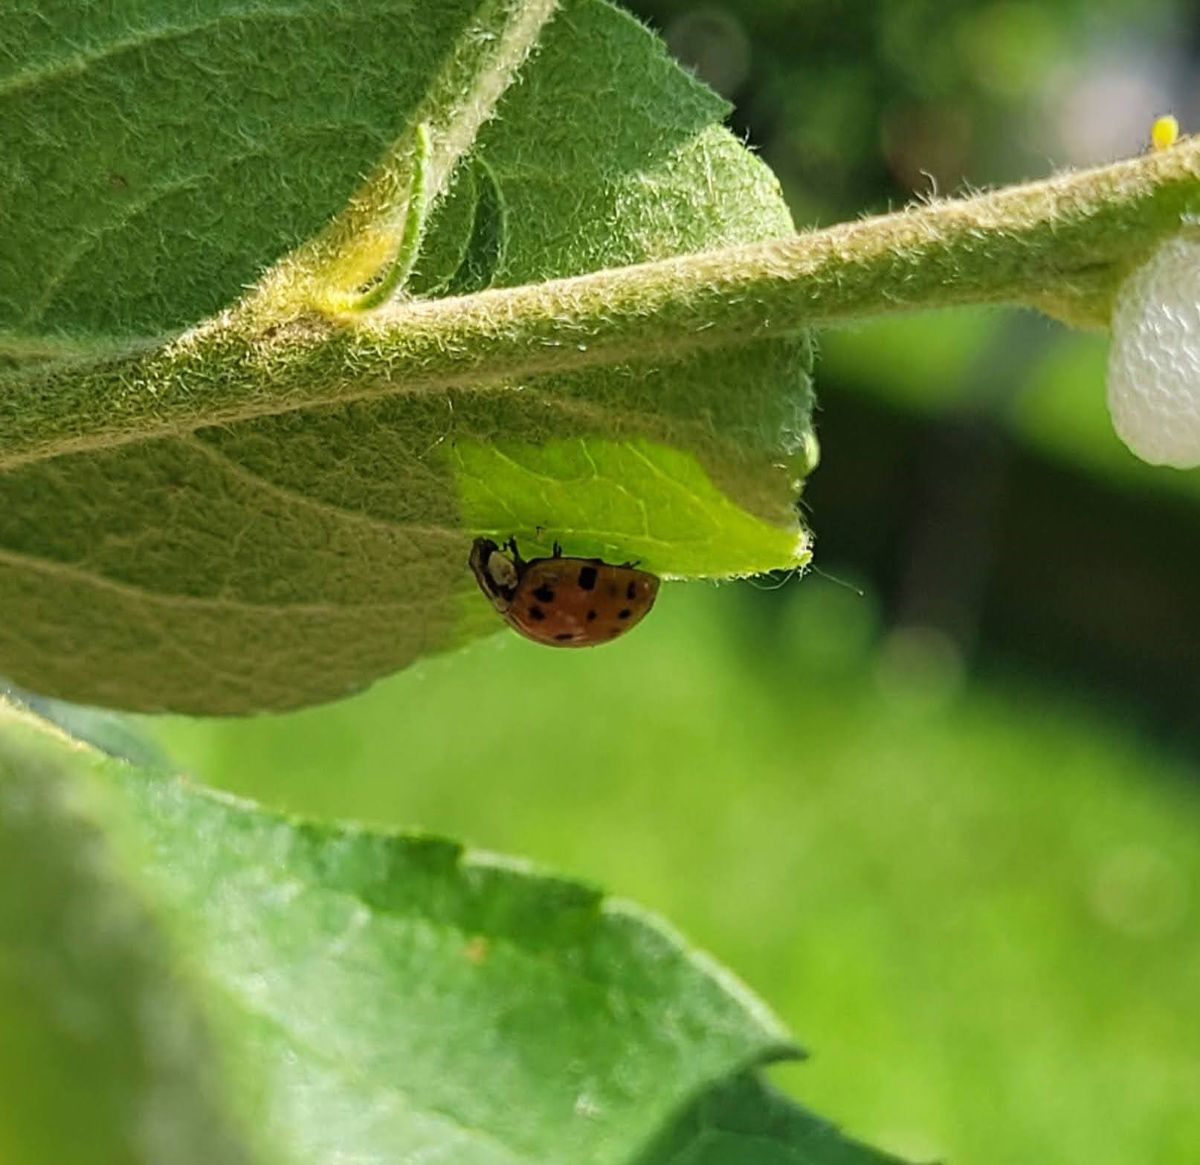 A ladybug eating aphids on an apple tree